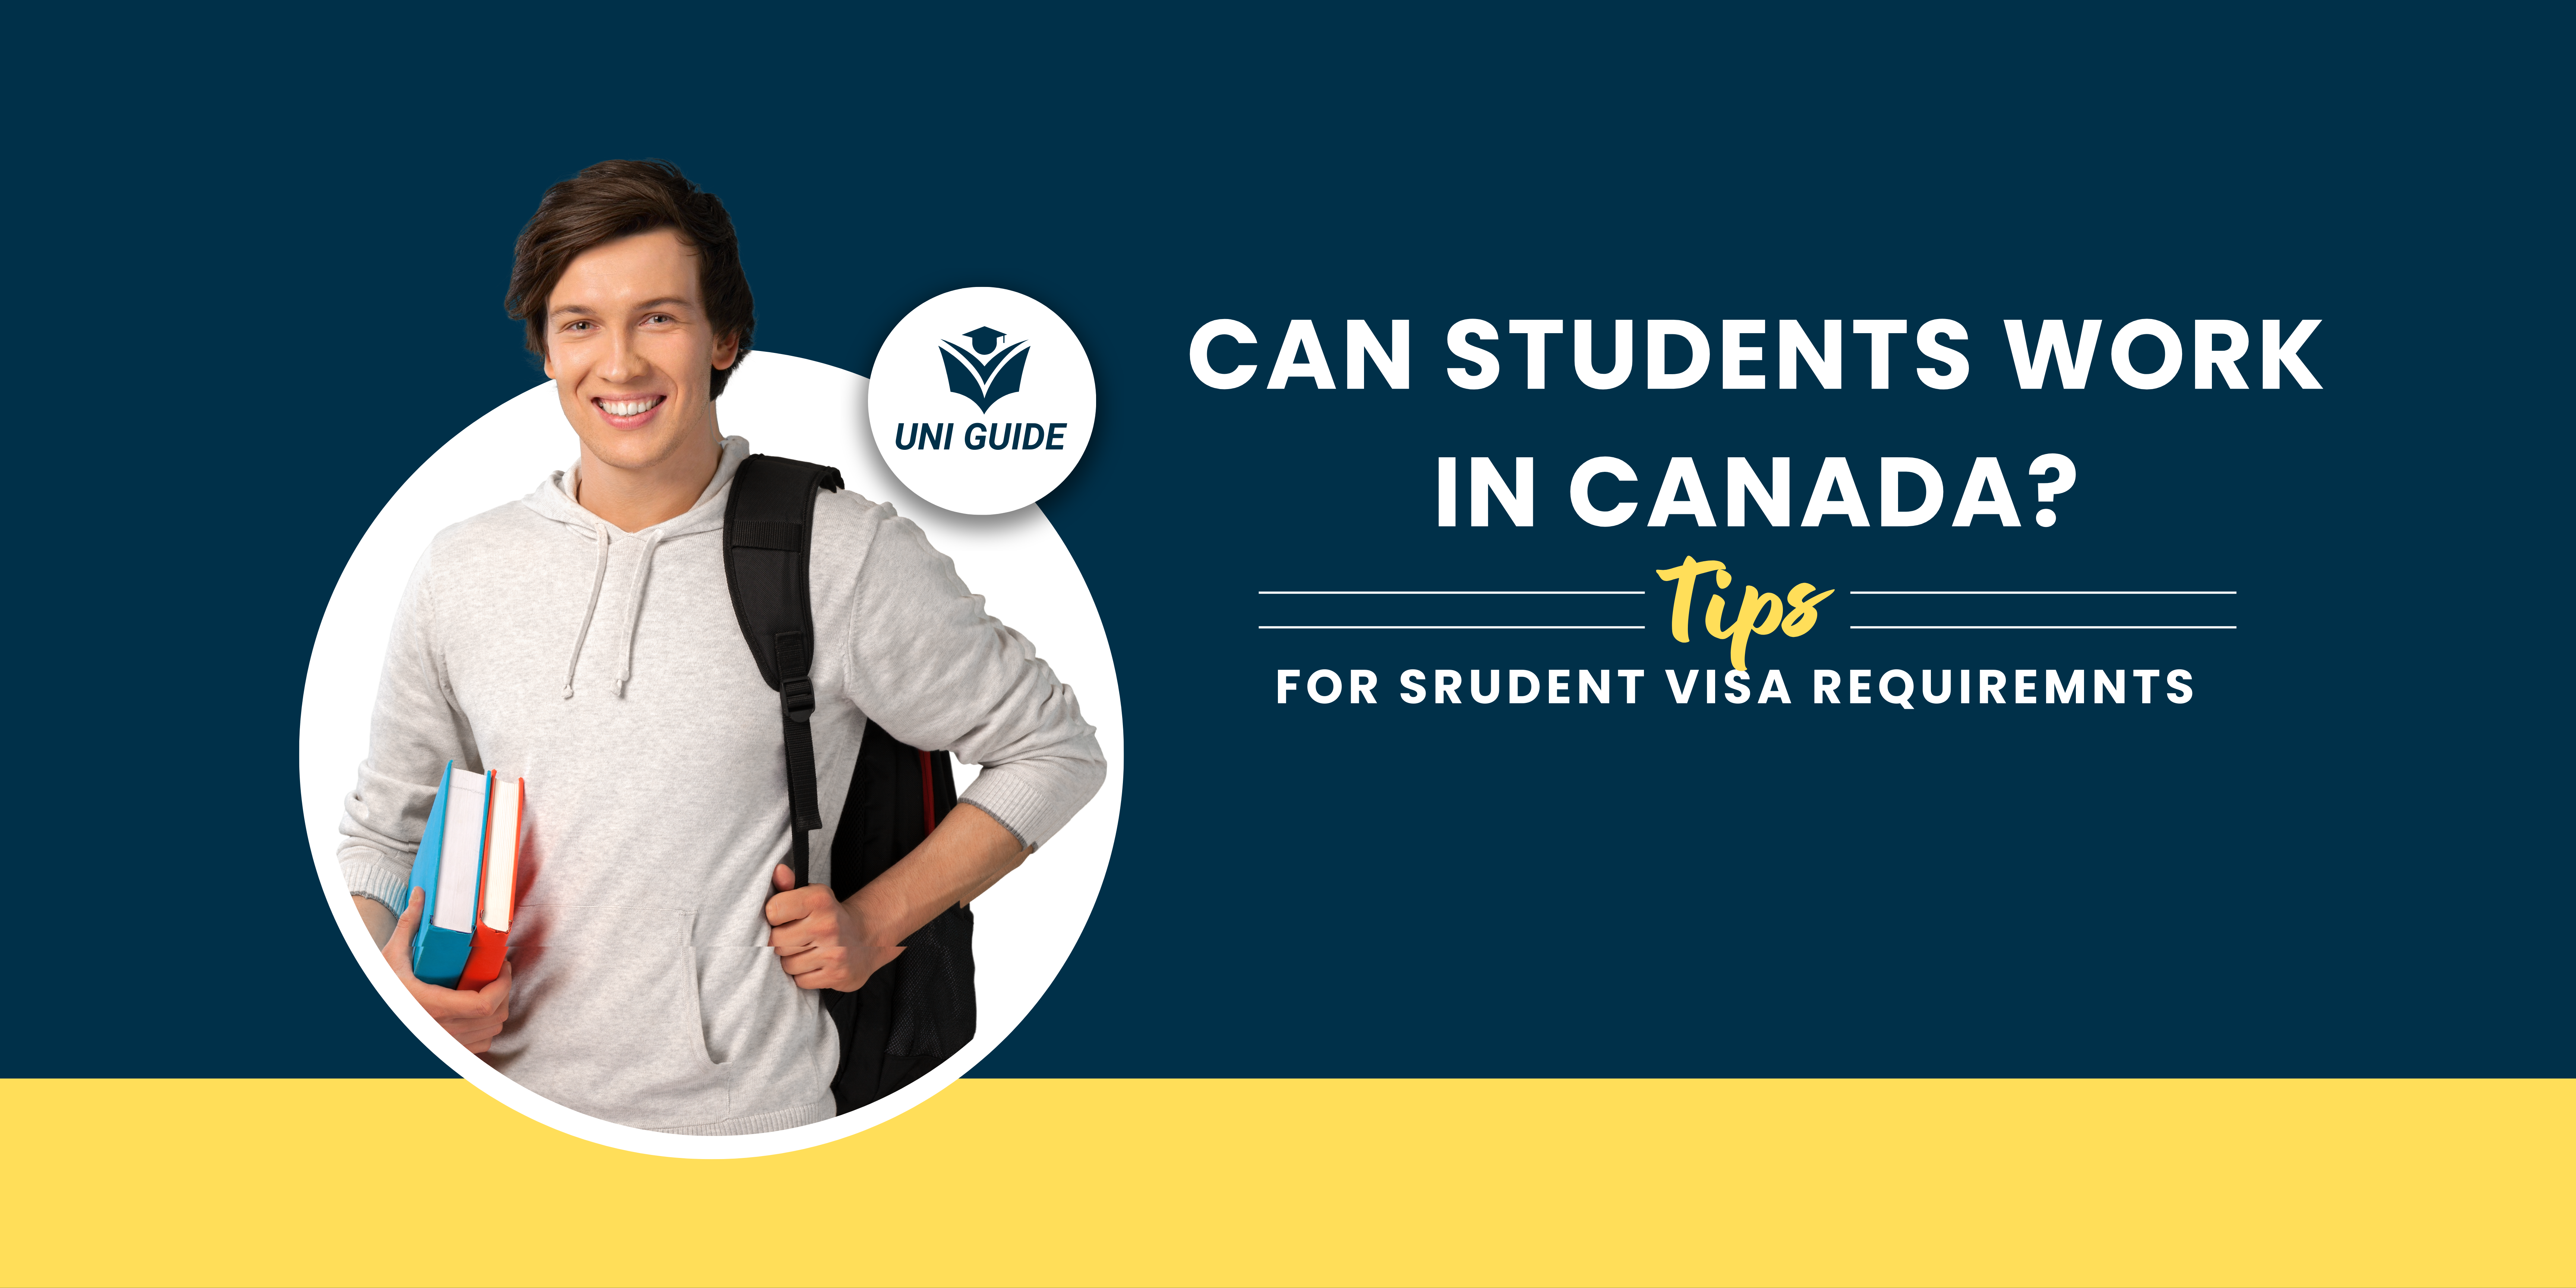 How to work in Canada as a student